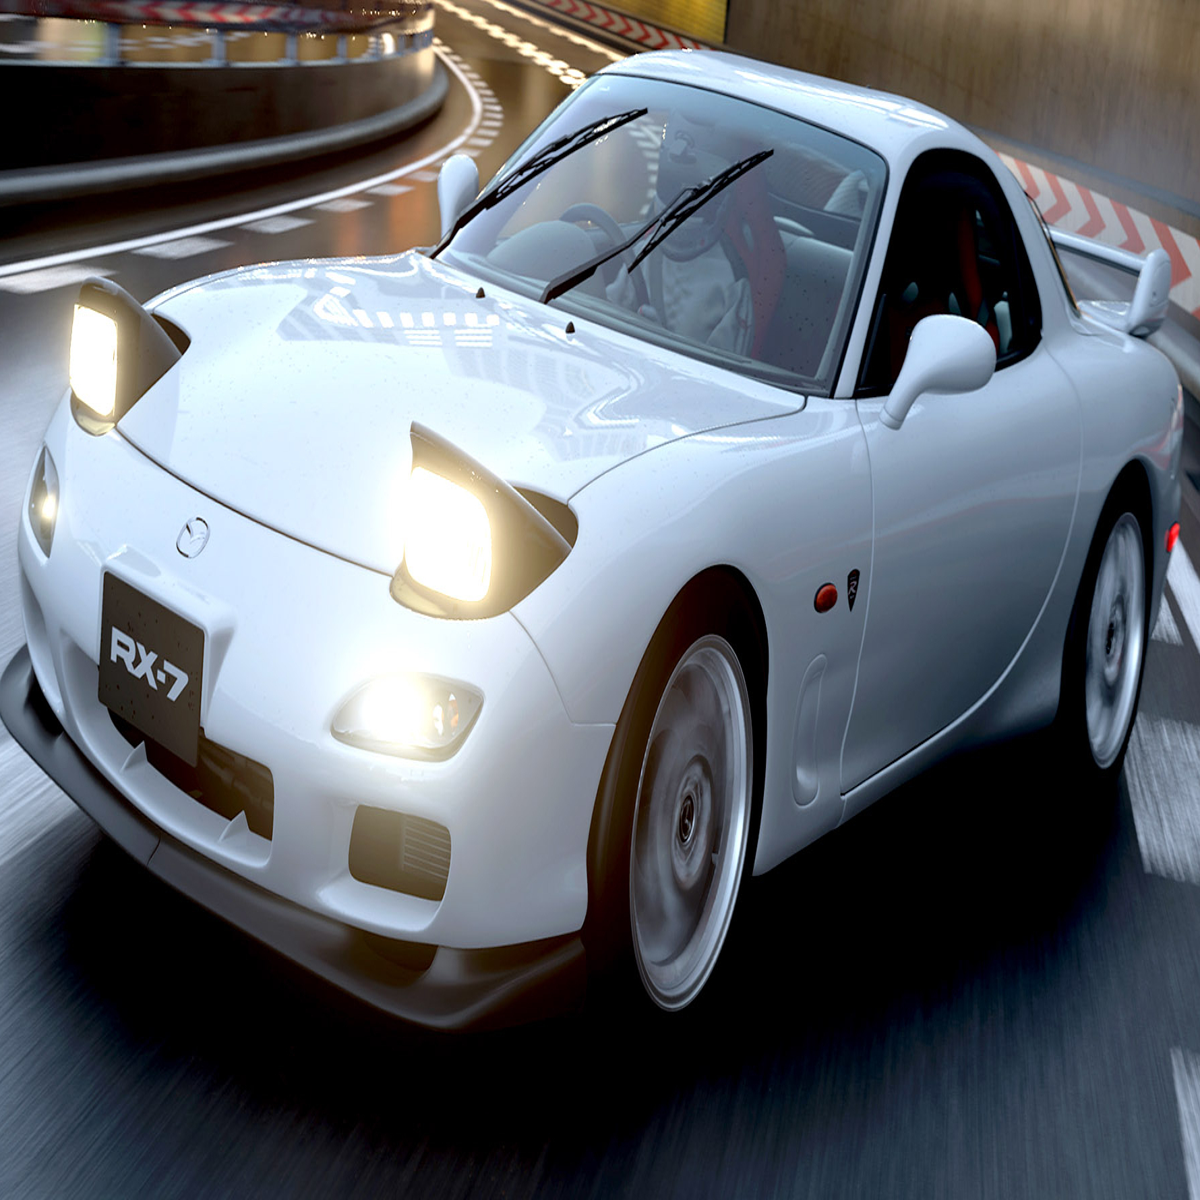 Gran Turismo 7 – PS5 vs. PS4 performance comparison, and what about the ray  tracing?